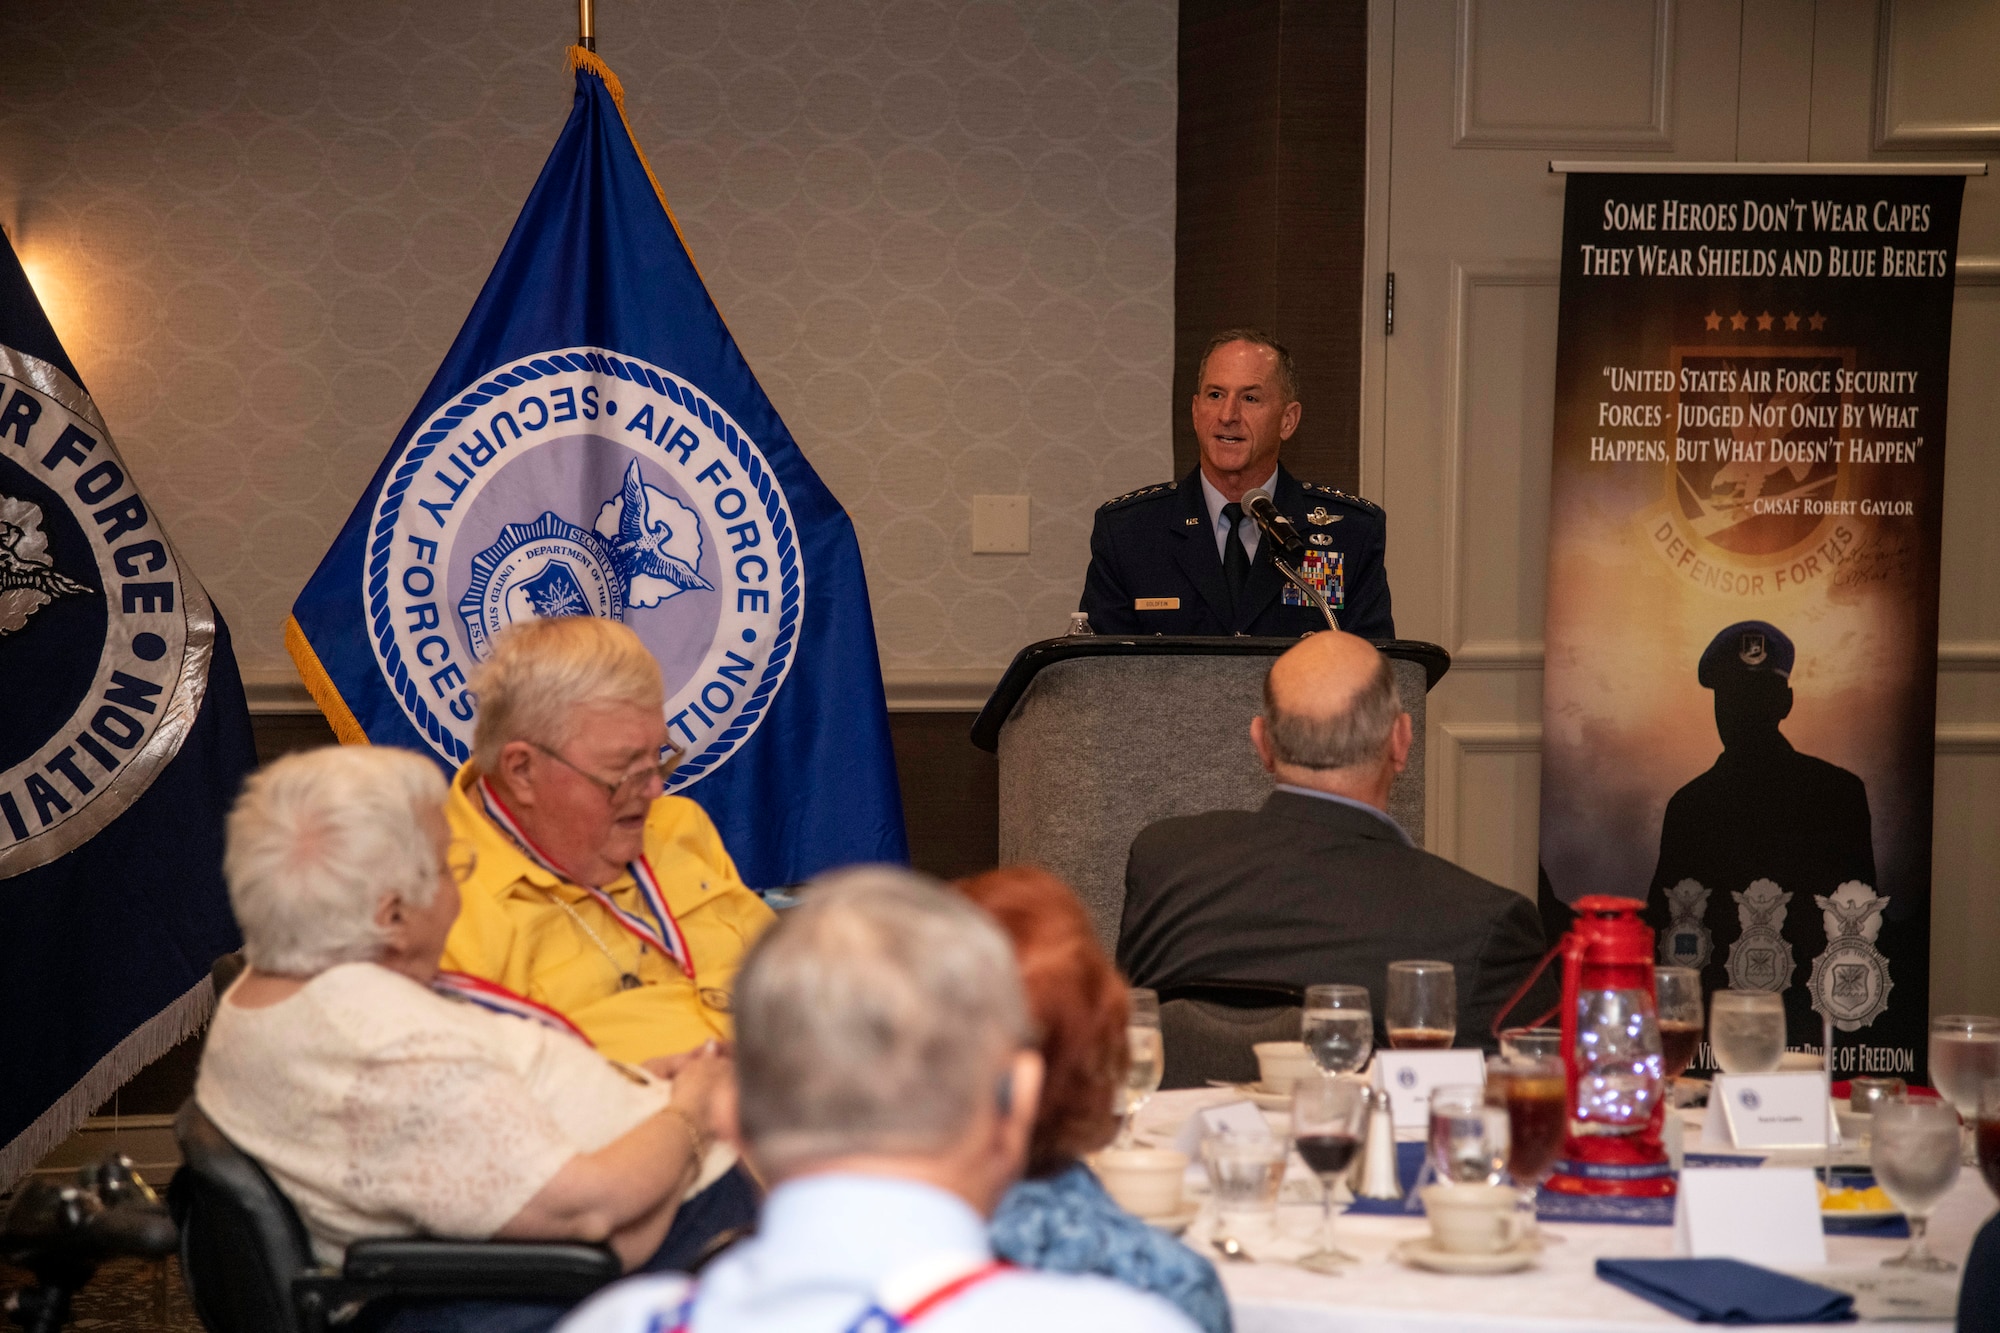 Air Force Chief of Staff Gen. David L. Goldfein addresses Security Forces Defenders, past and present, at the 33rd Air Force Security Forces Association national meeting banquet in San Antonio Sept. 28.9, in San Antonio, Texas.